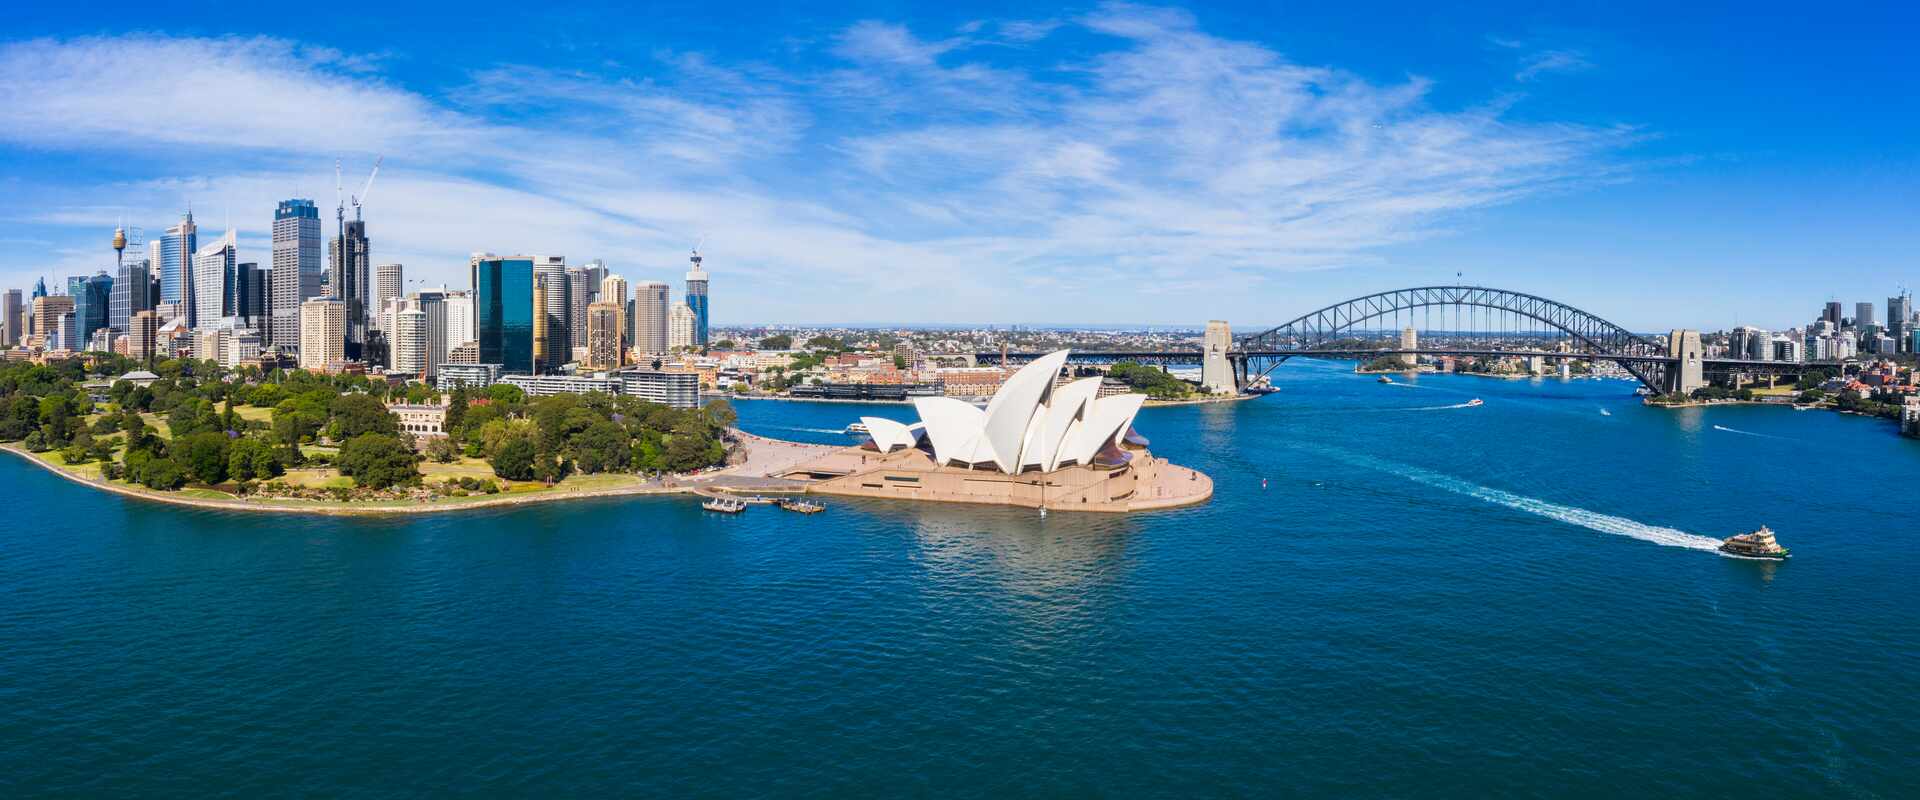 sydney harbour opera house cbd and bridge by day new south wales australia